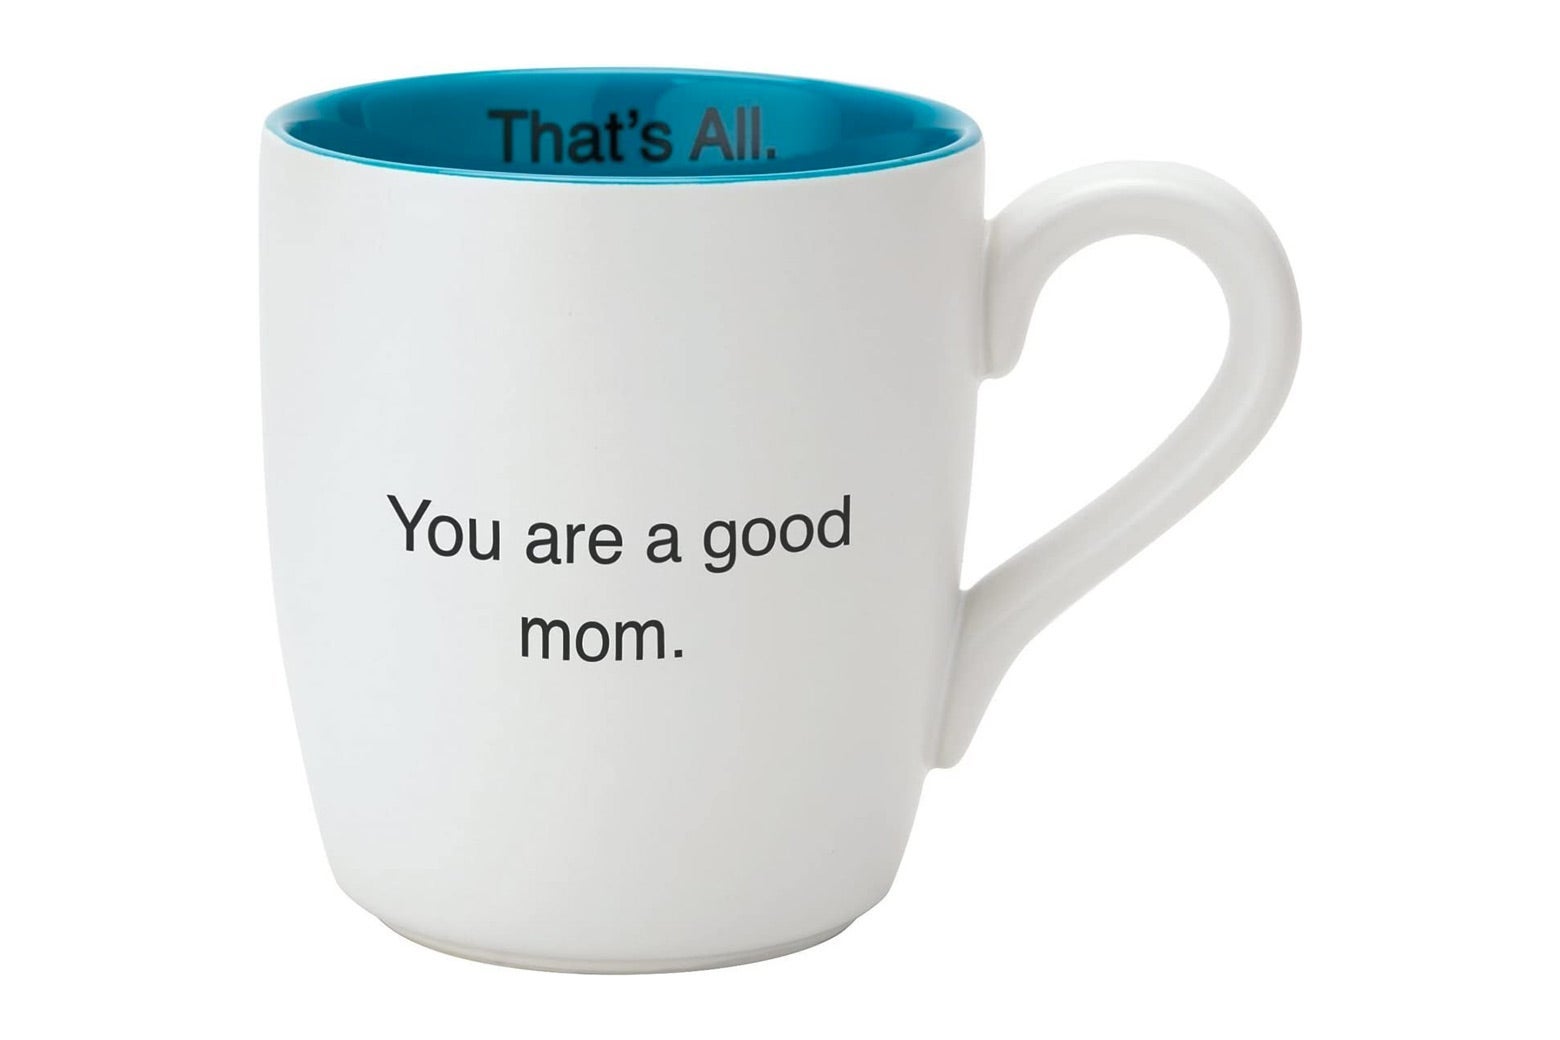 Ceramic mug with "You are a good mom" printed on the outside and "That's all" printed on the inside